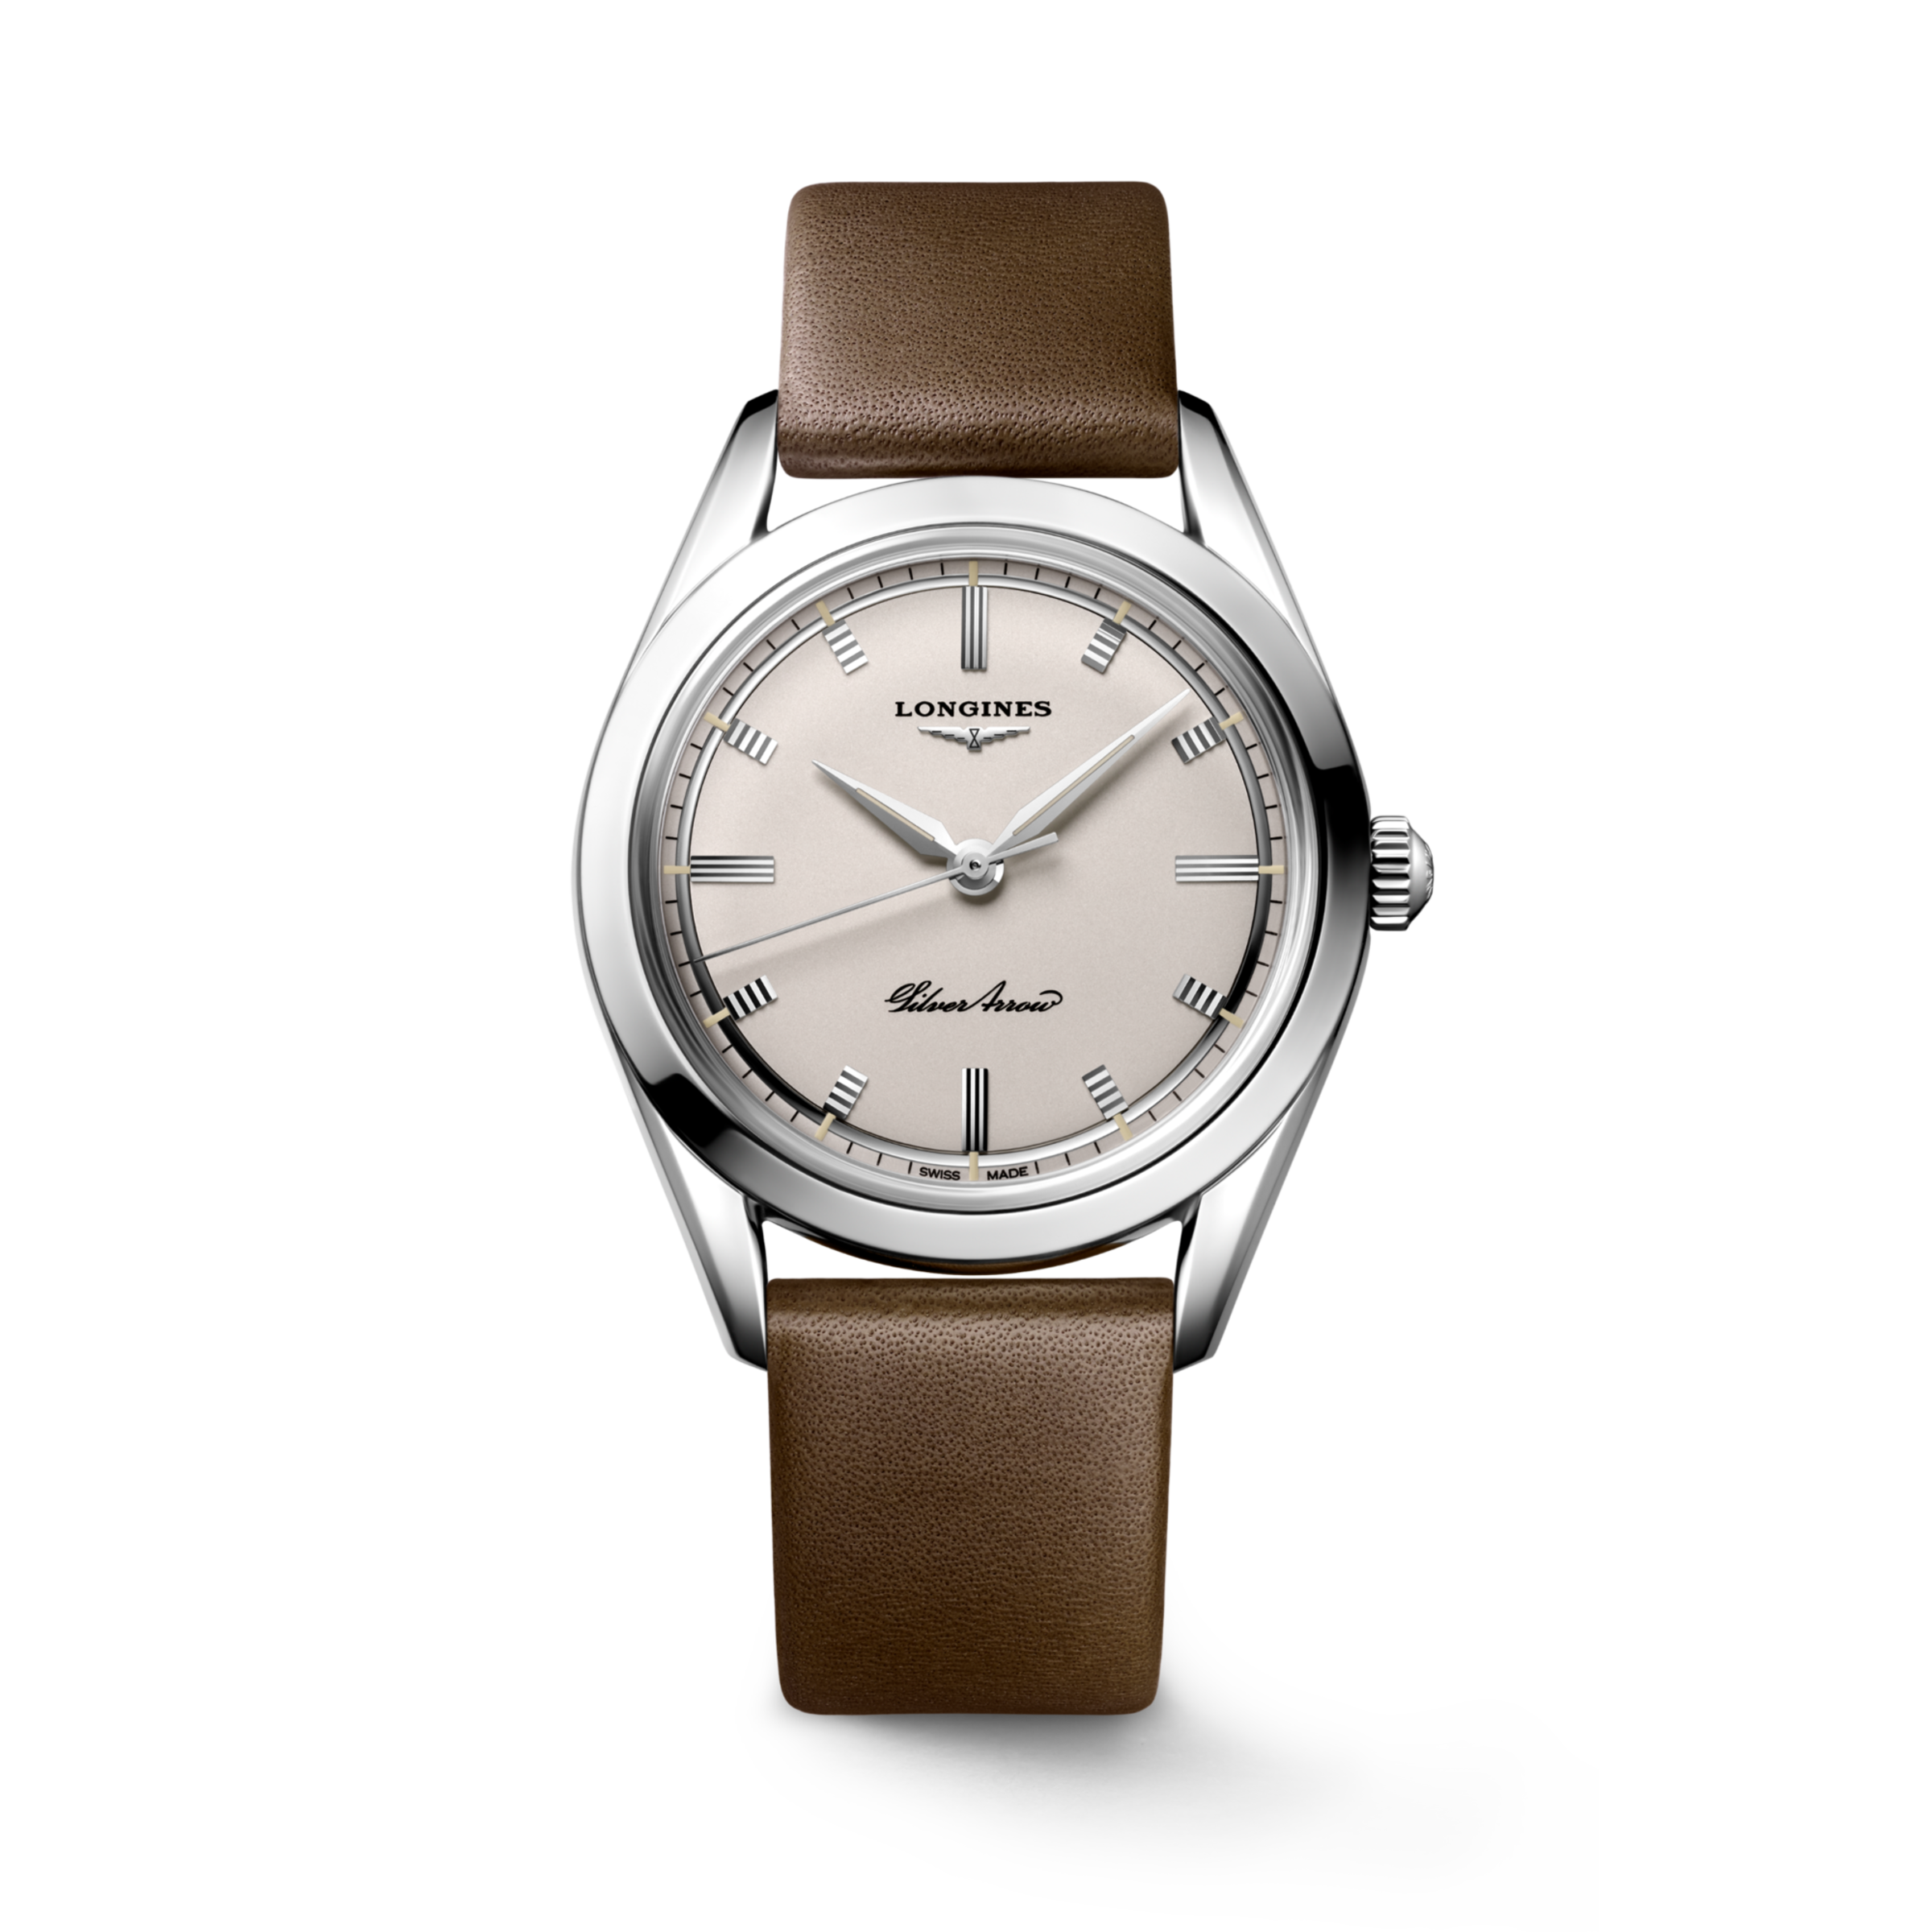 Longines THE LONGINES HERITAGE CLASSIC Automatic Stainless steel Watch - L2.834.4.72.2